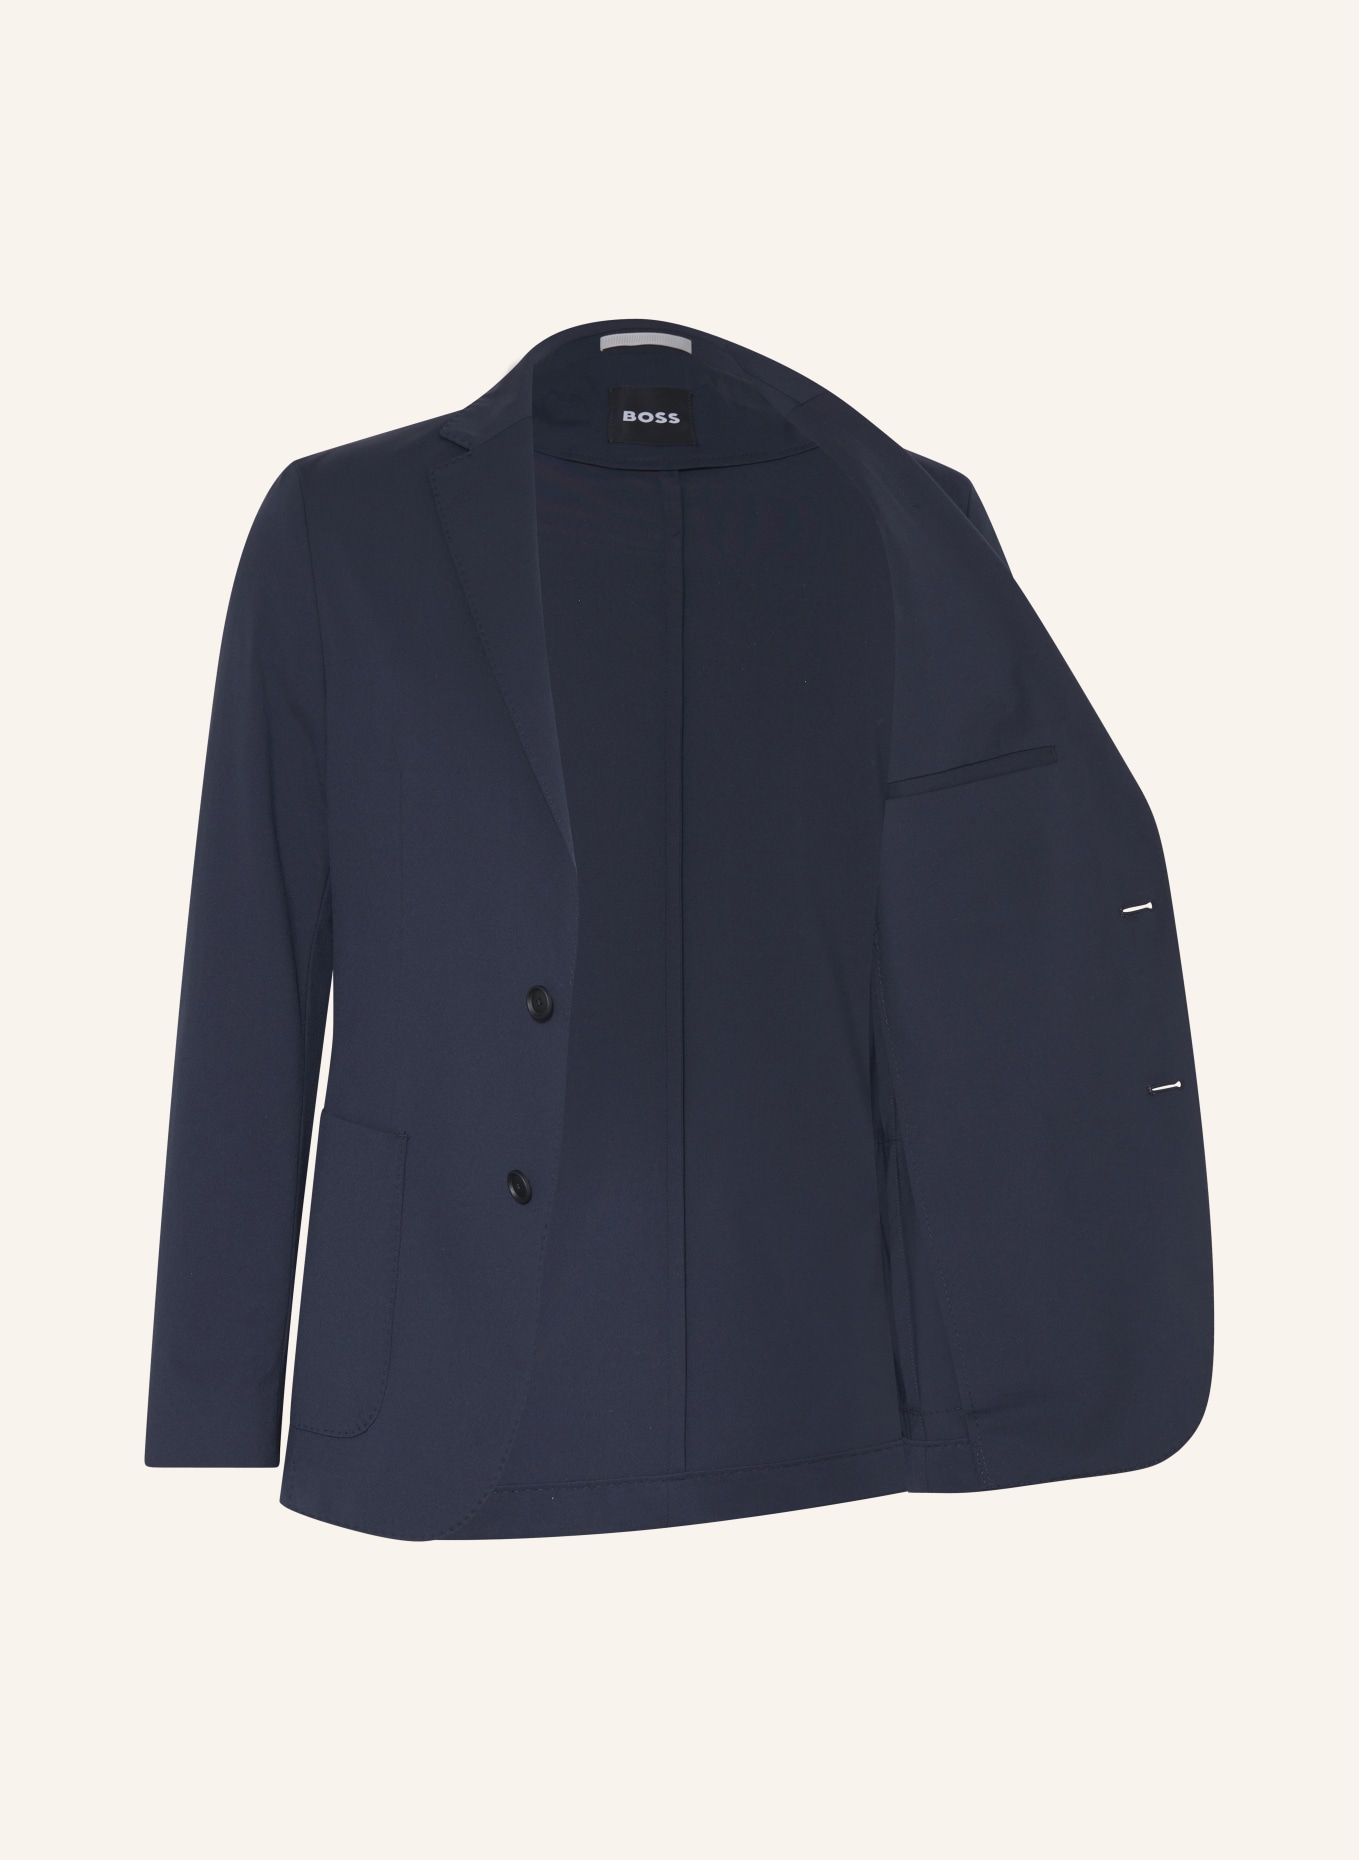 BOSS Suit jacket HANRY extra slim fit made of jersey, Color: DARK BLUE (Image 4)